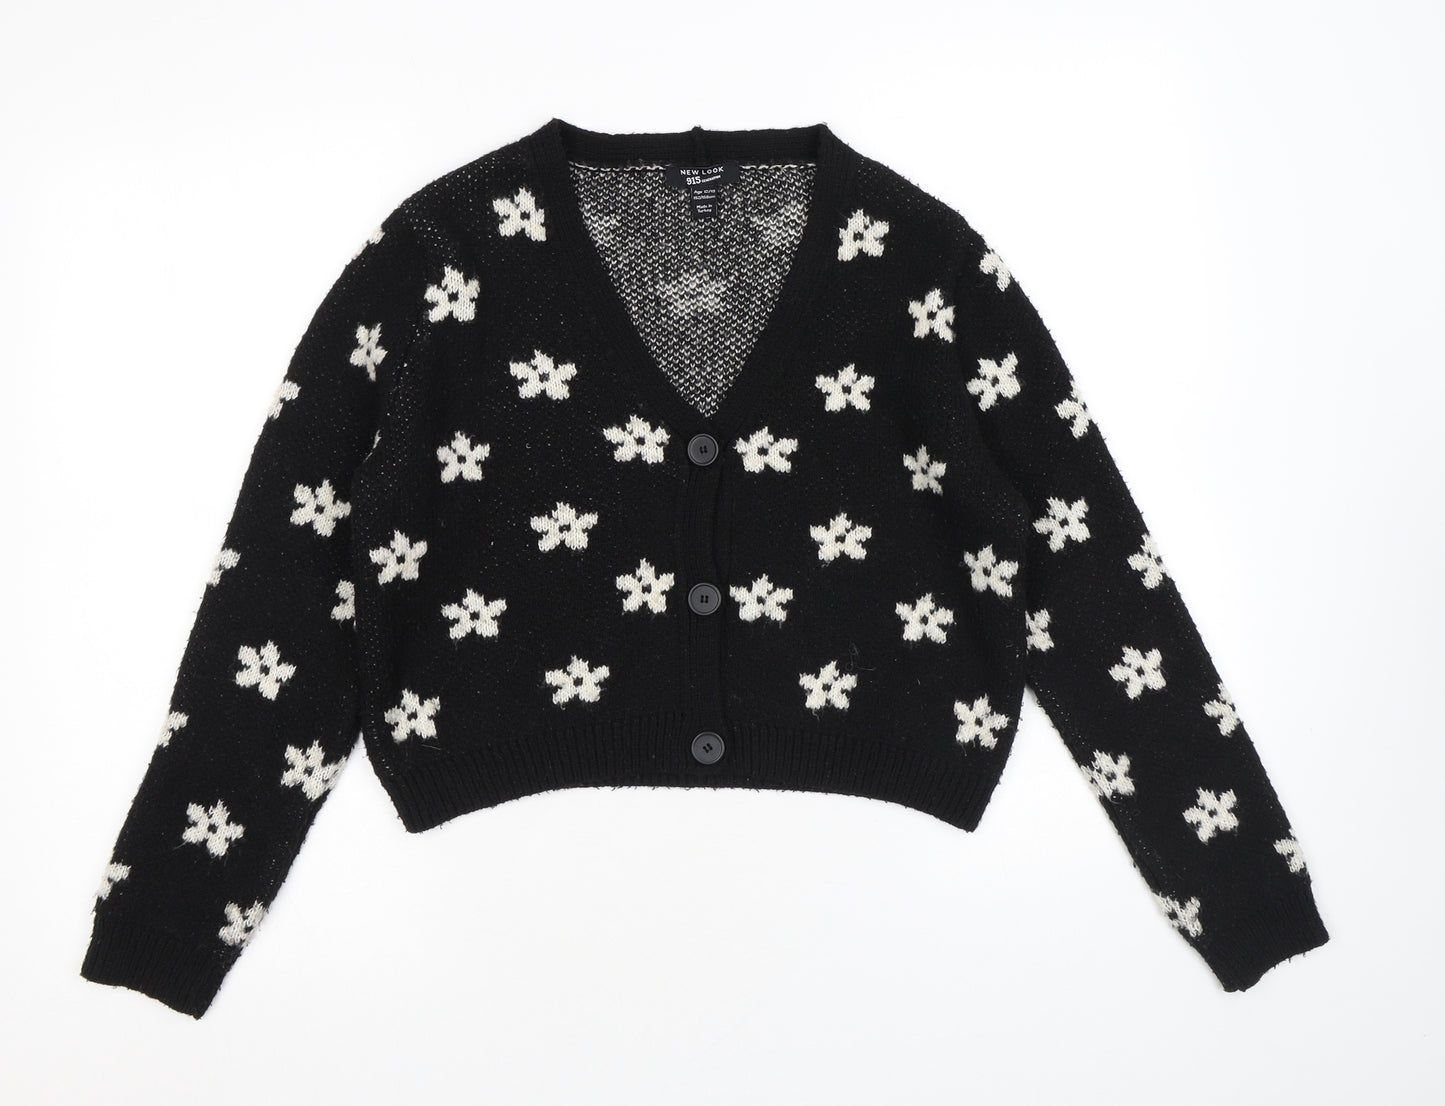 New Look Girls Black V-Neck Floral Acrylic Cardigan Jumper Size 12-13 Years Button